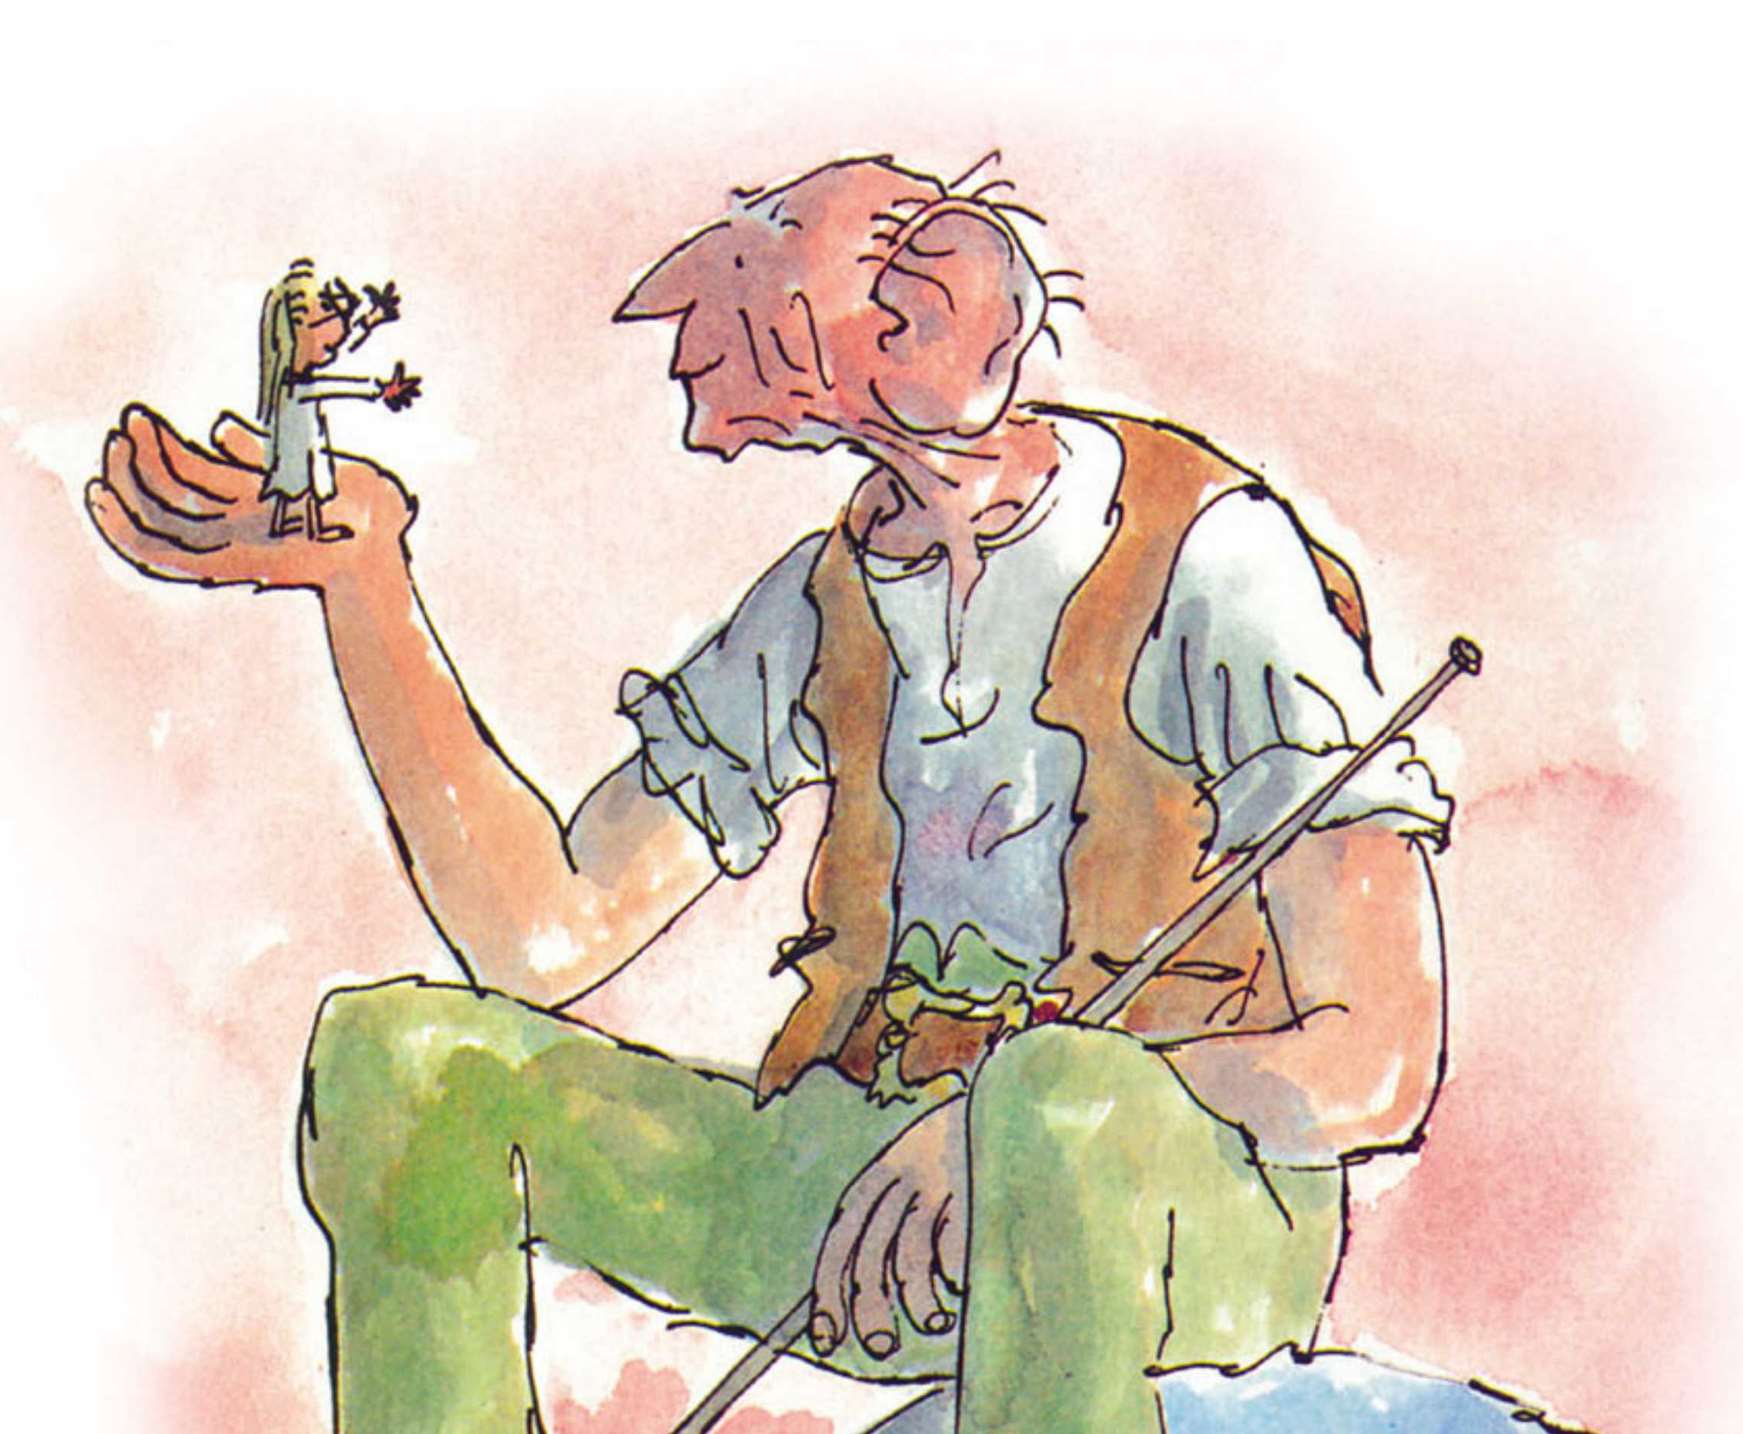 The BFG comes to The Beaney Picture: The House of Illustration